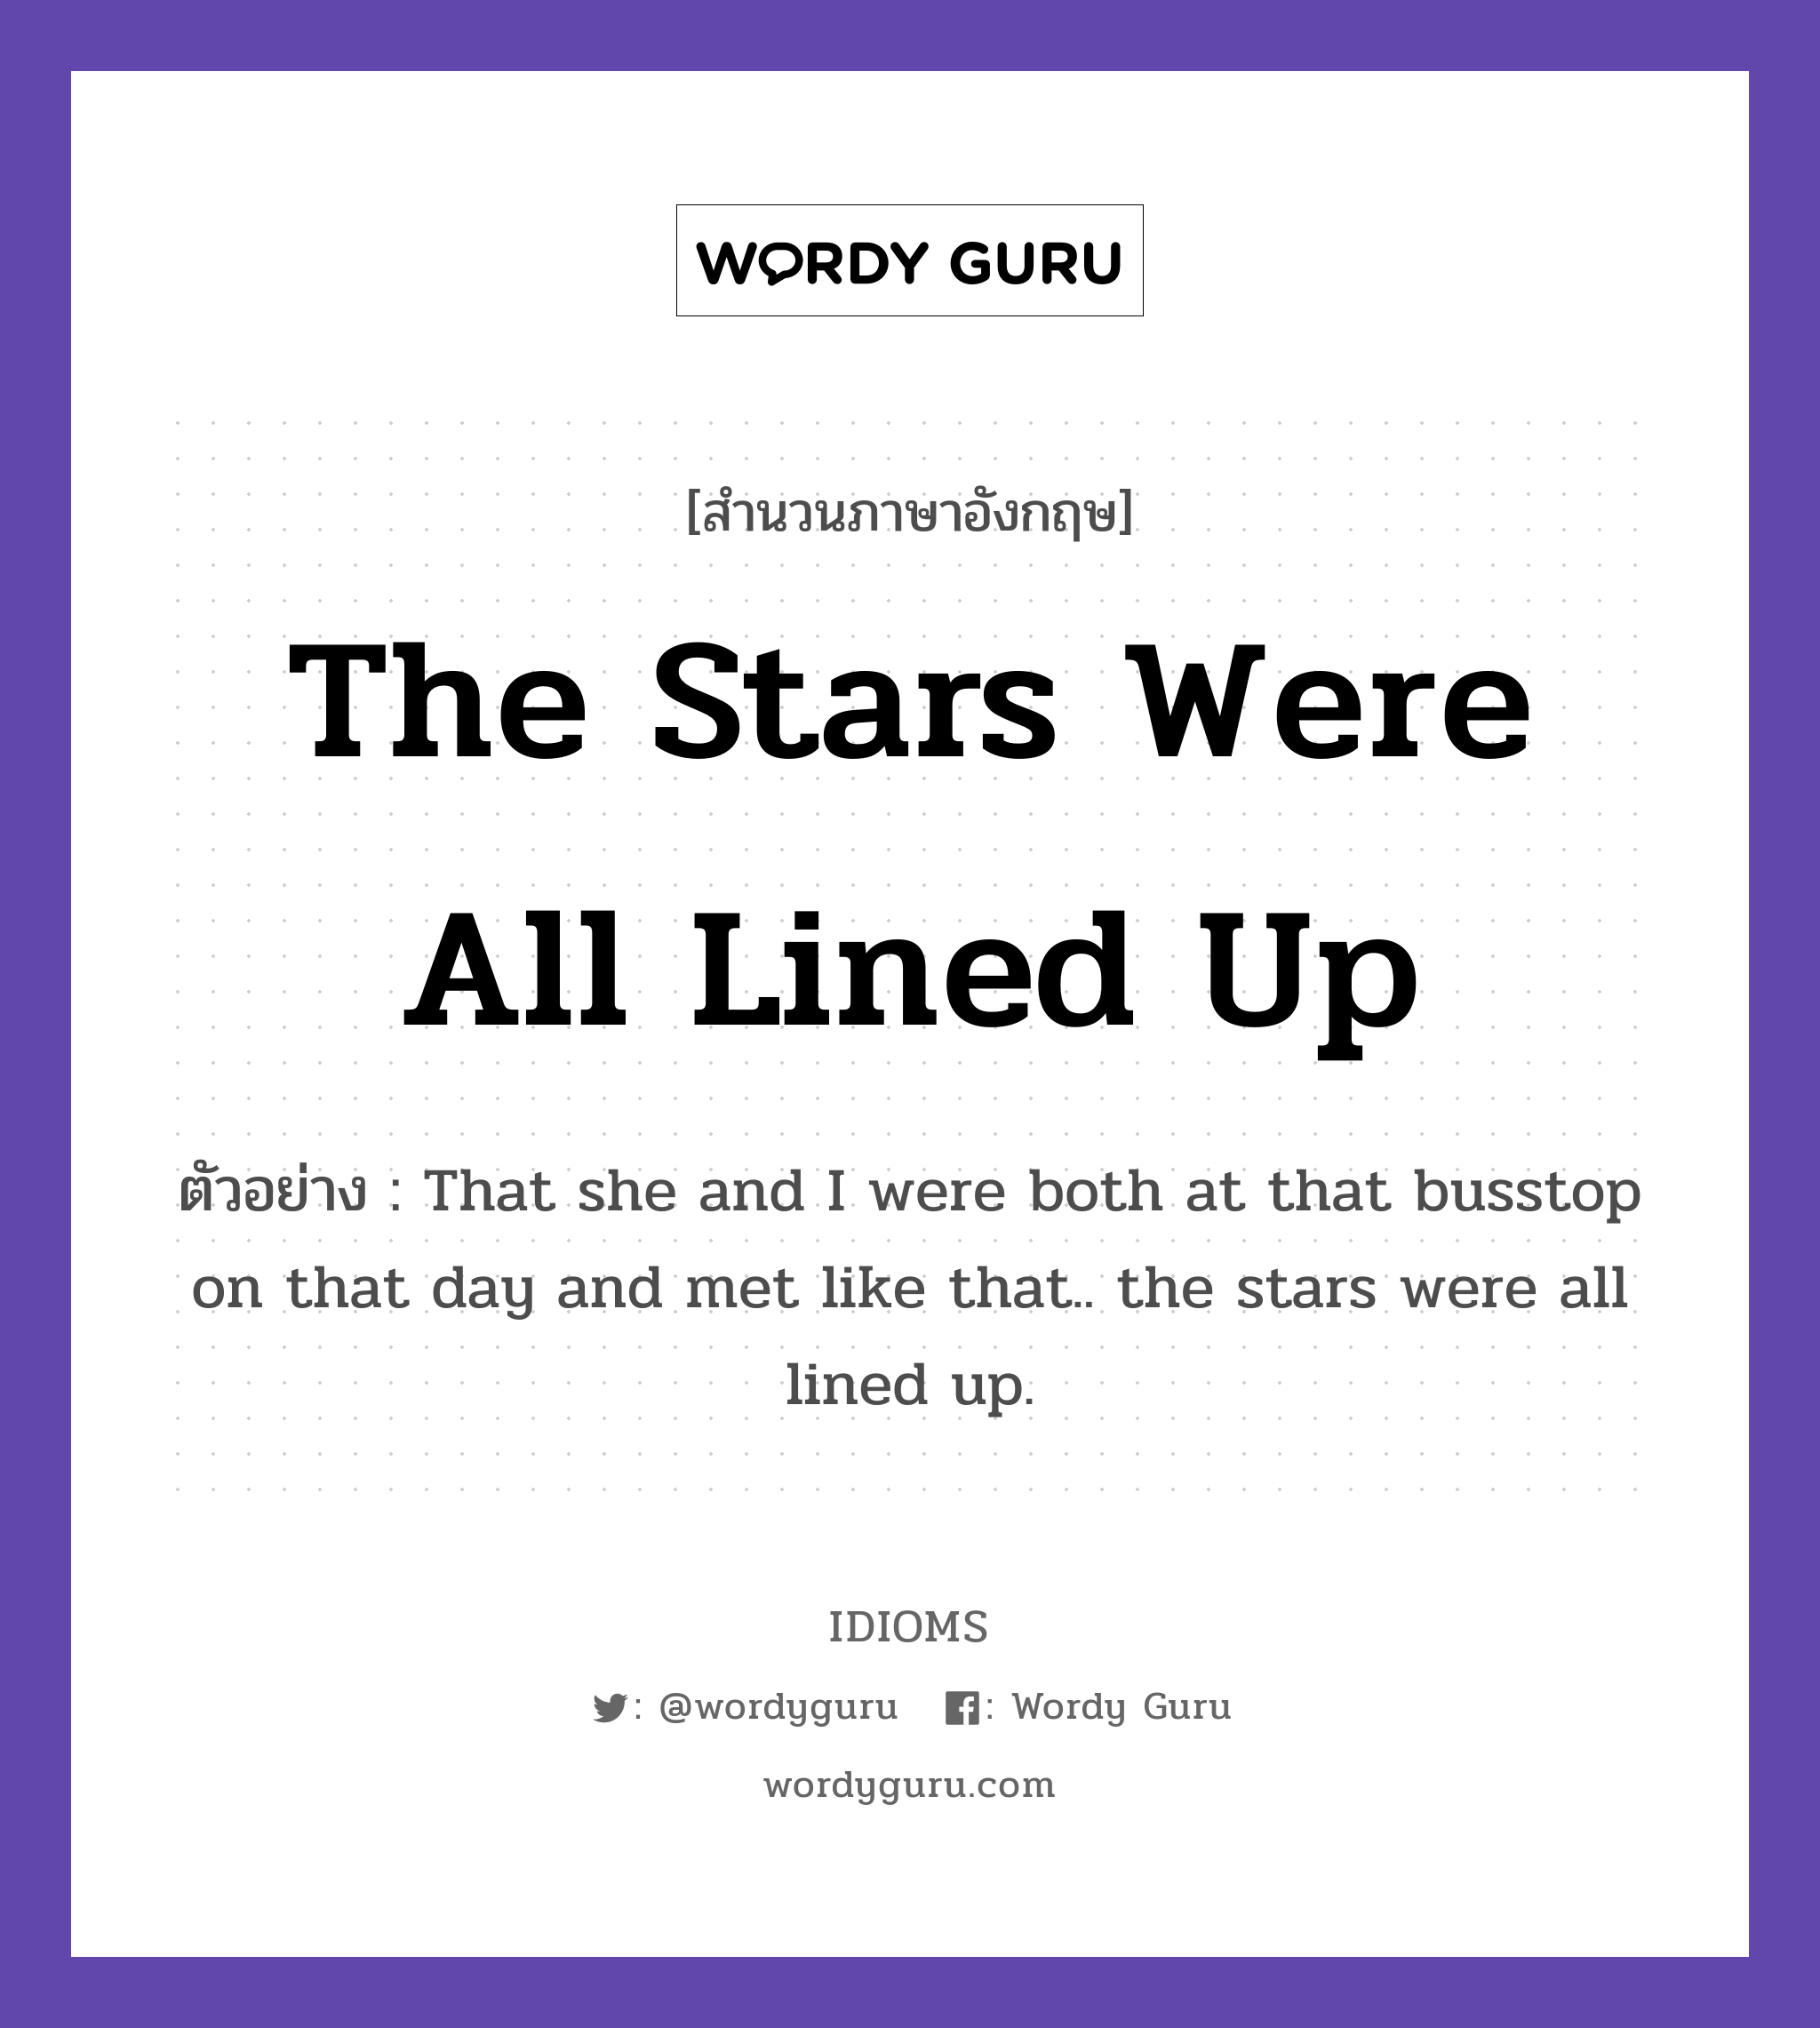 The Stars Were All Lined Up แปลว่า?, สำนวนภาษาอังกฤษ The Stars Were All Lined Up ตัวอย่าง That she and I were both at that busstop on that day and met like that.. the stars were all lined up.